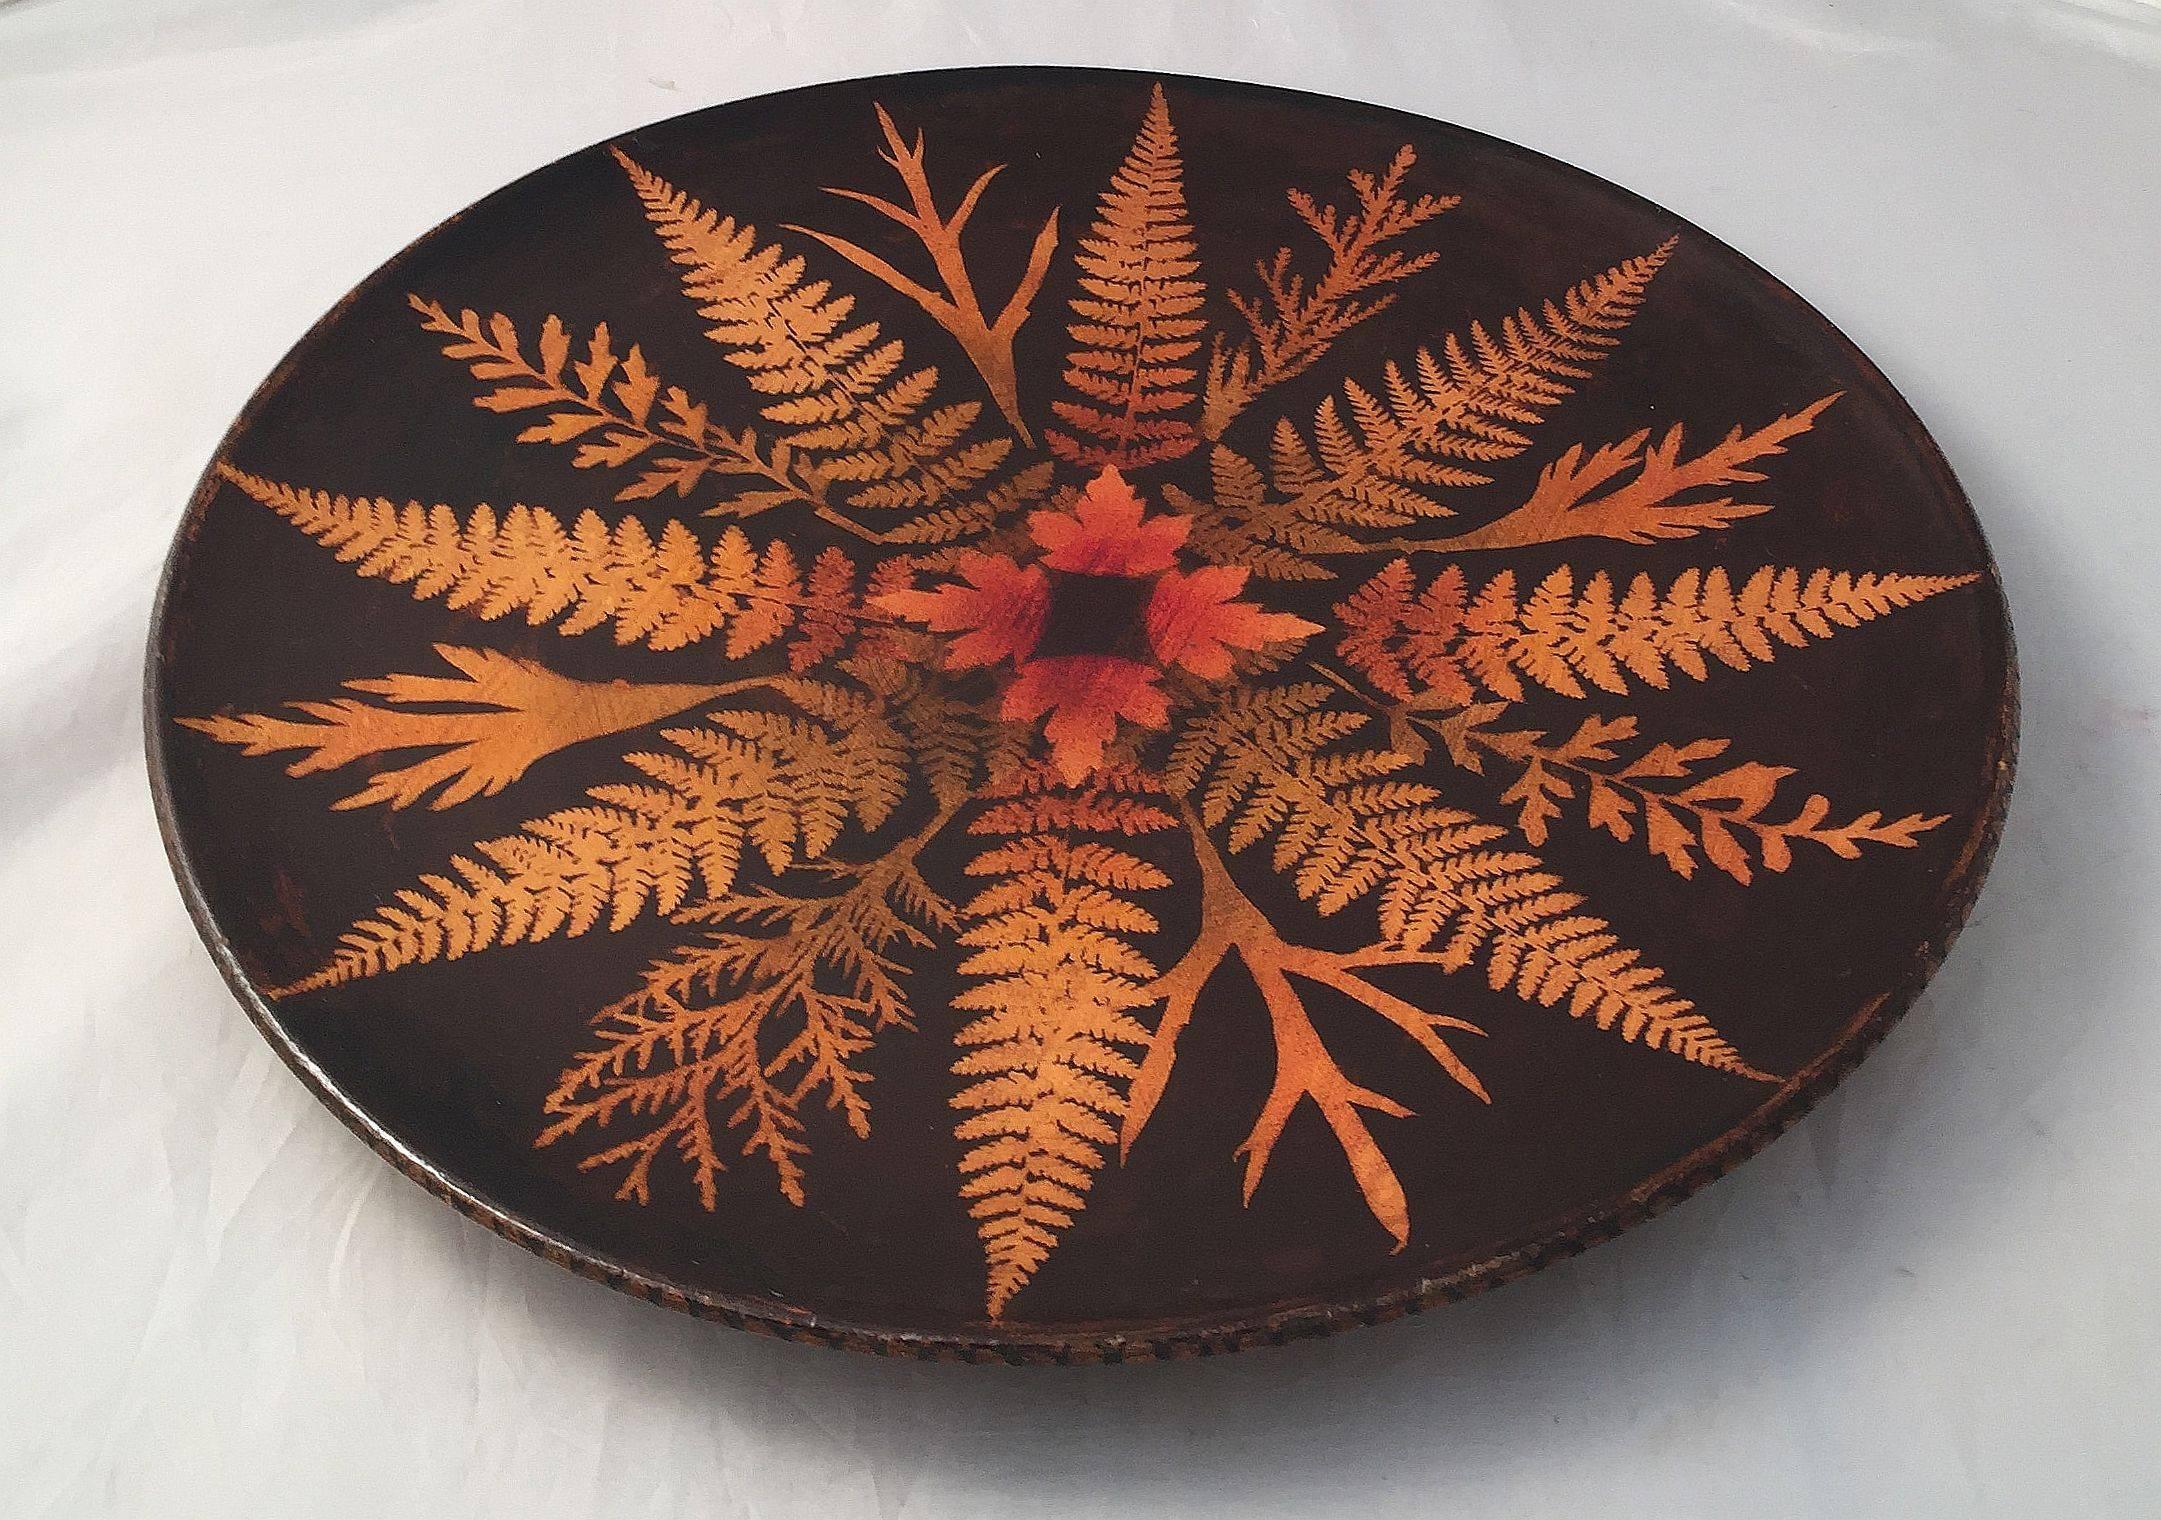 A fine large Scottish fernware charger of varnished sycamore wood and featuring a lovely radiating fern design from the center on the obverse and reverse sides.

Fernware was introduced in the 1870s. This involved applying actual ferns to the wood